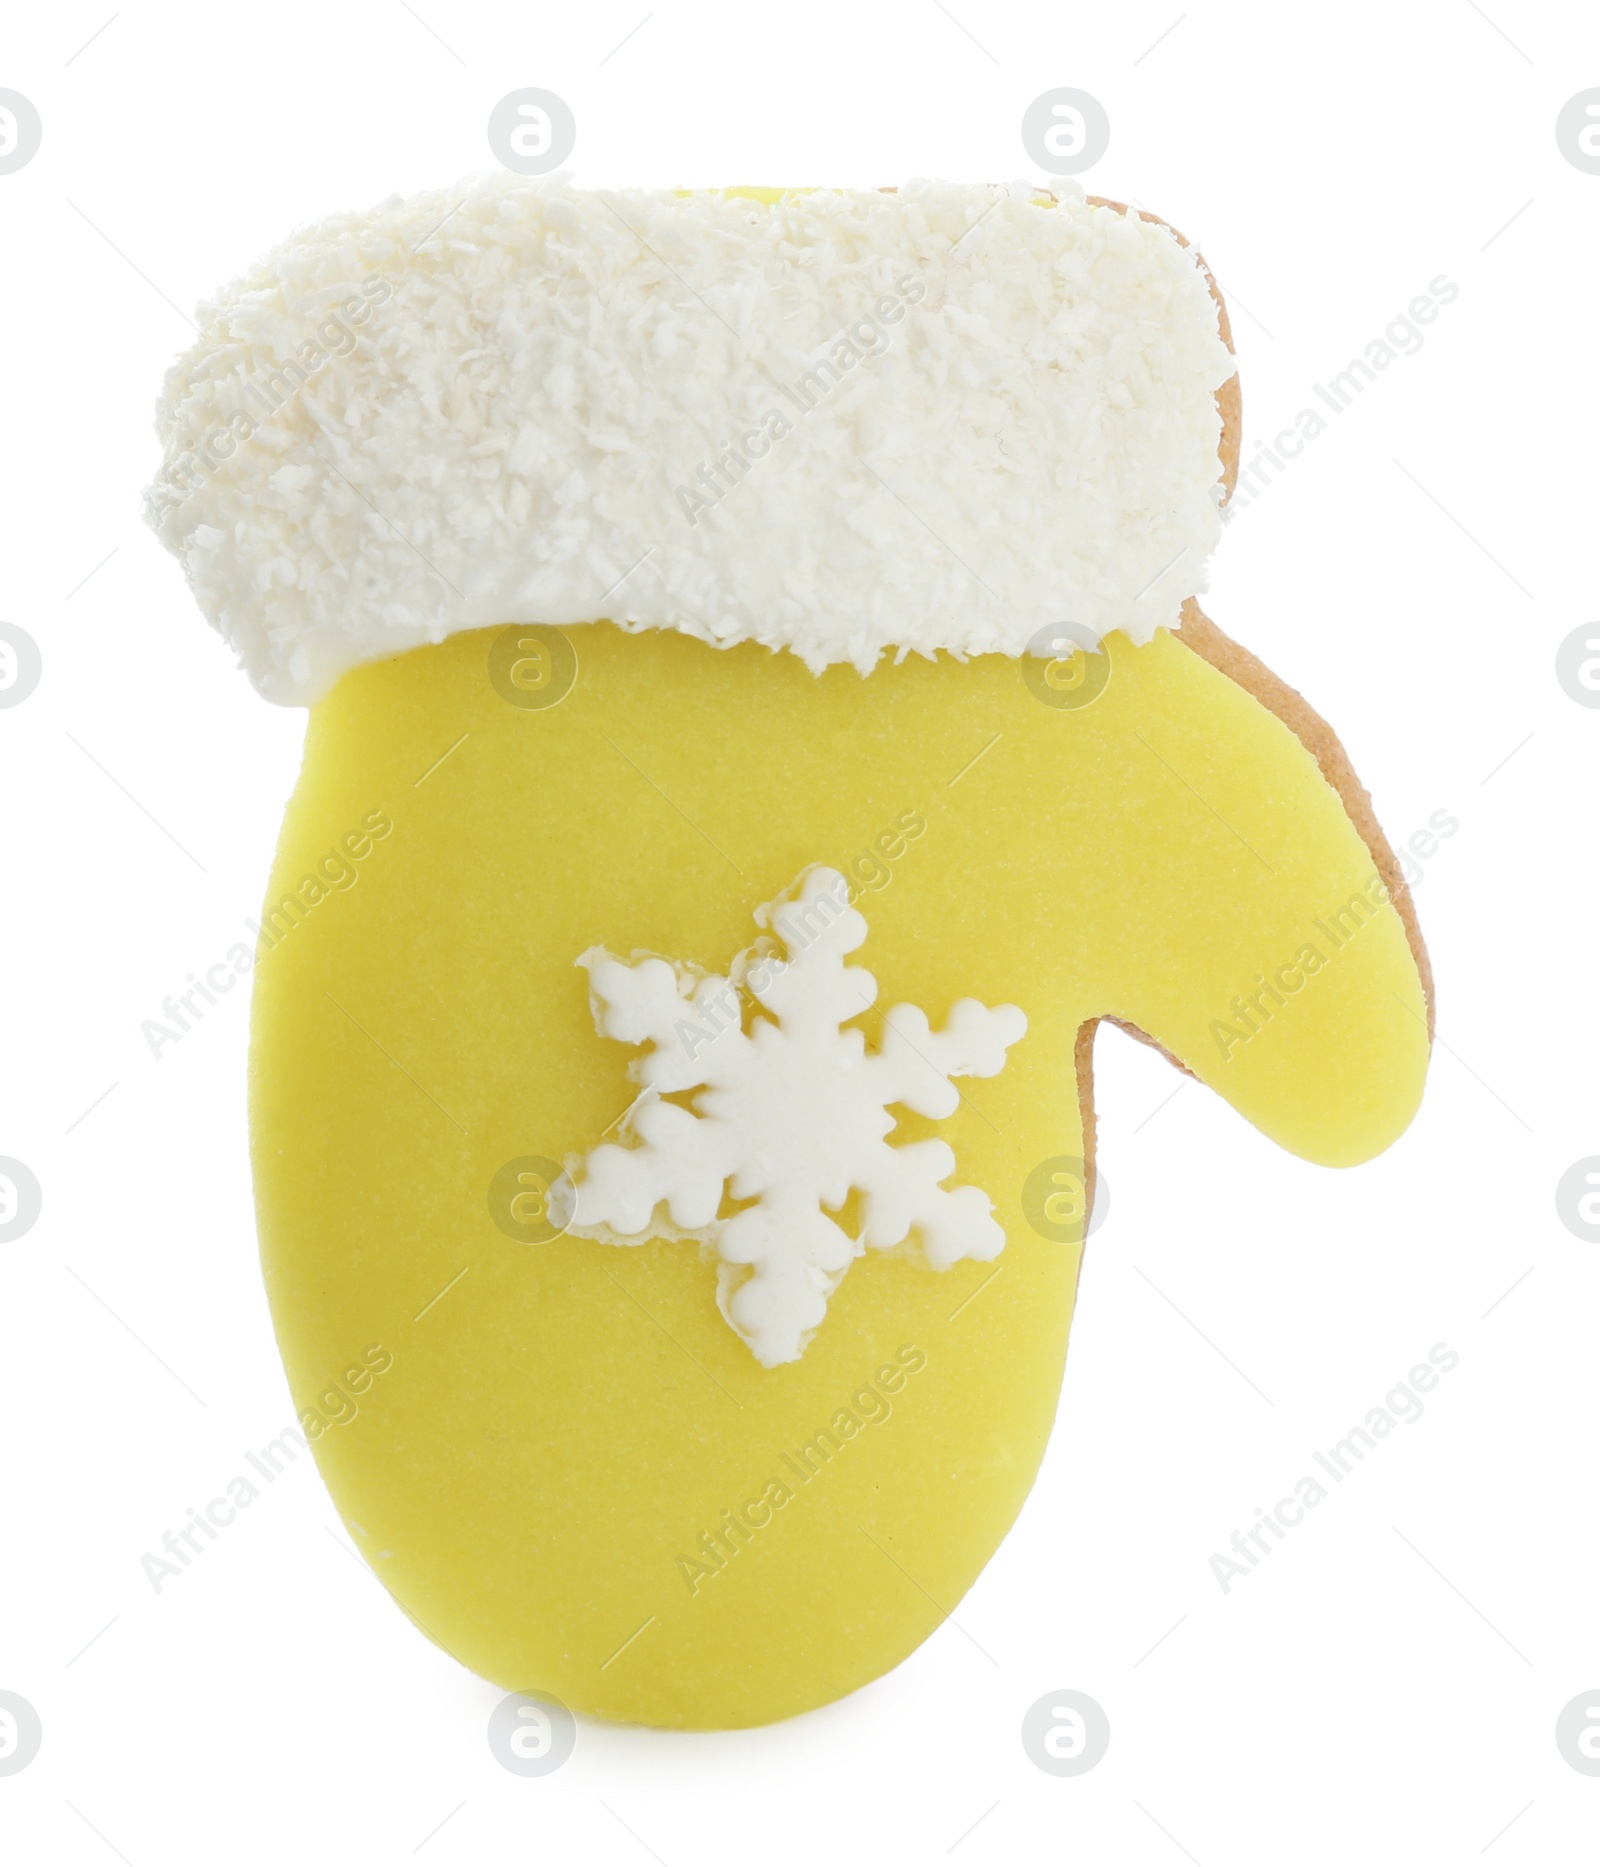 Photo of Tasty mitten shaped Christmas cookie isolated on white